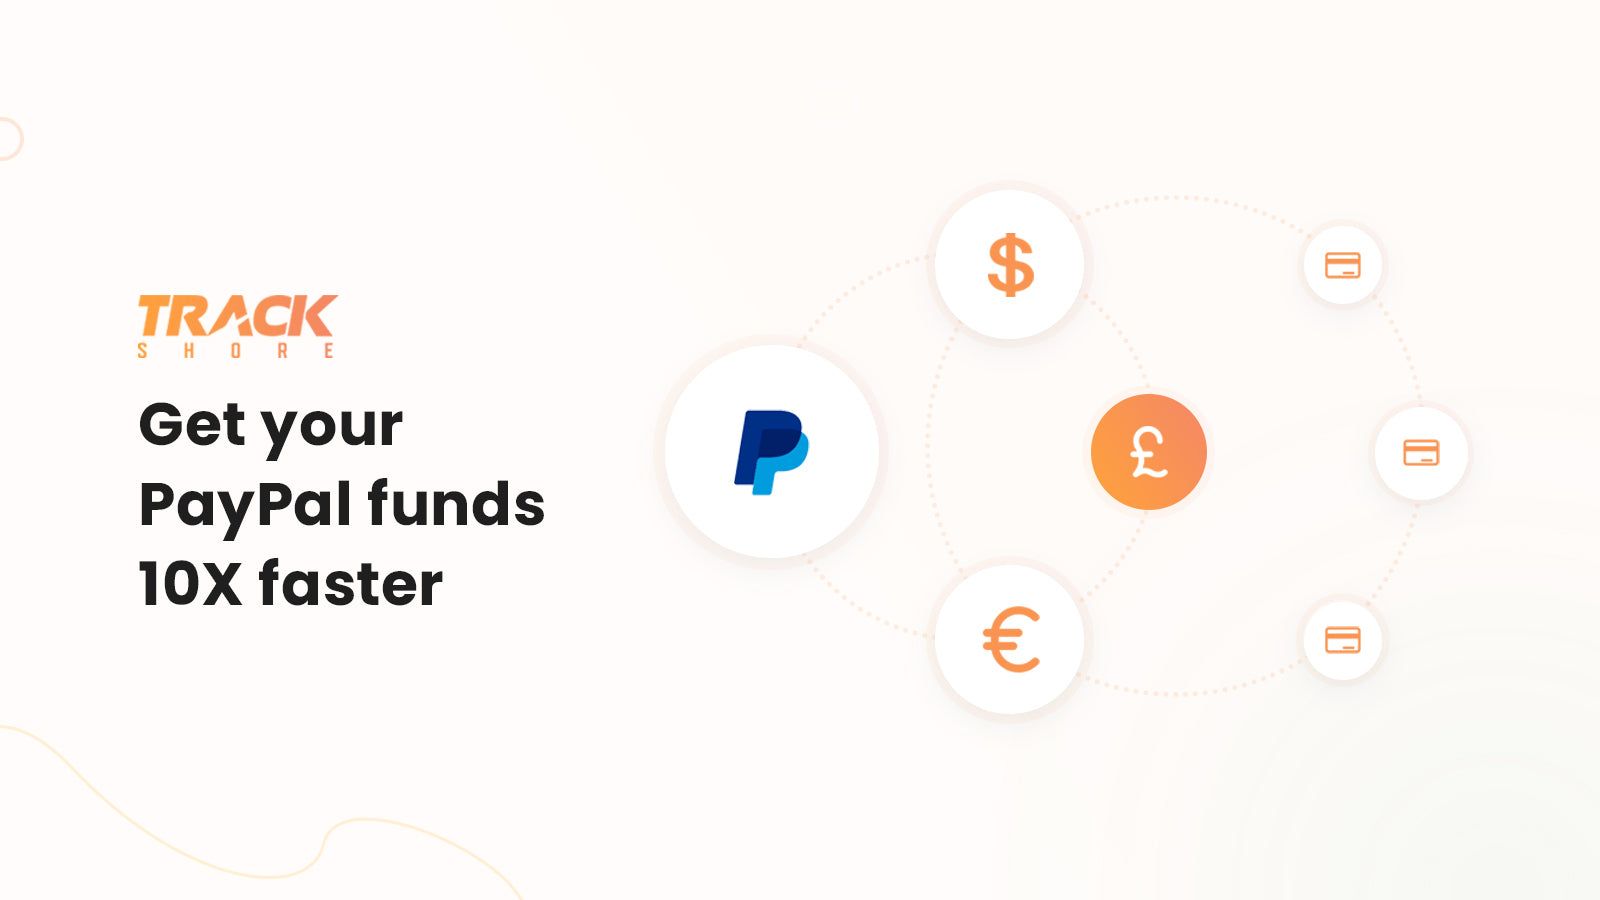 Get your PayPal funds 10x faster